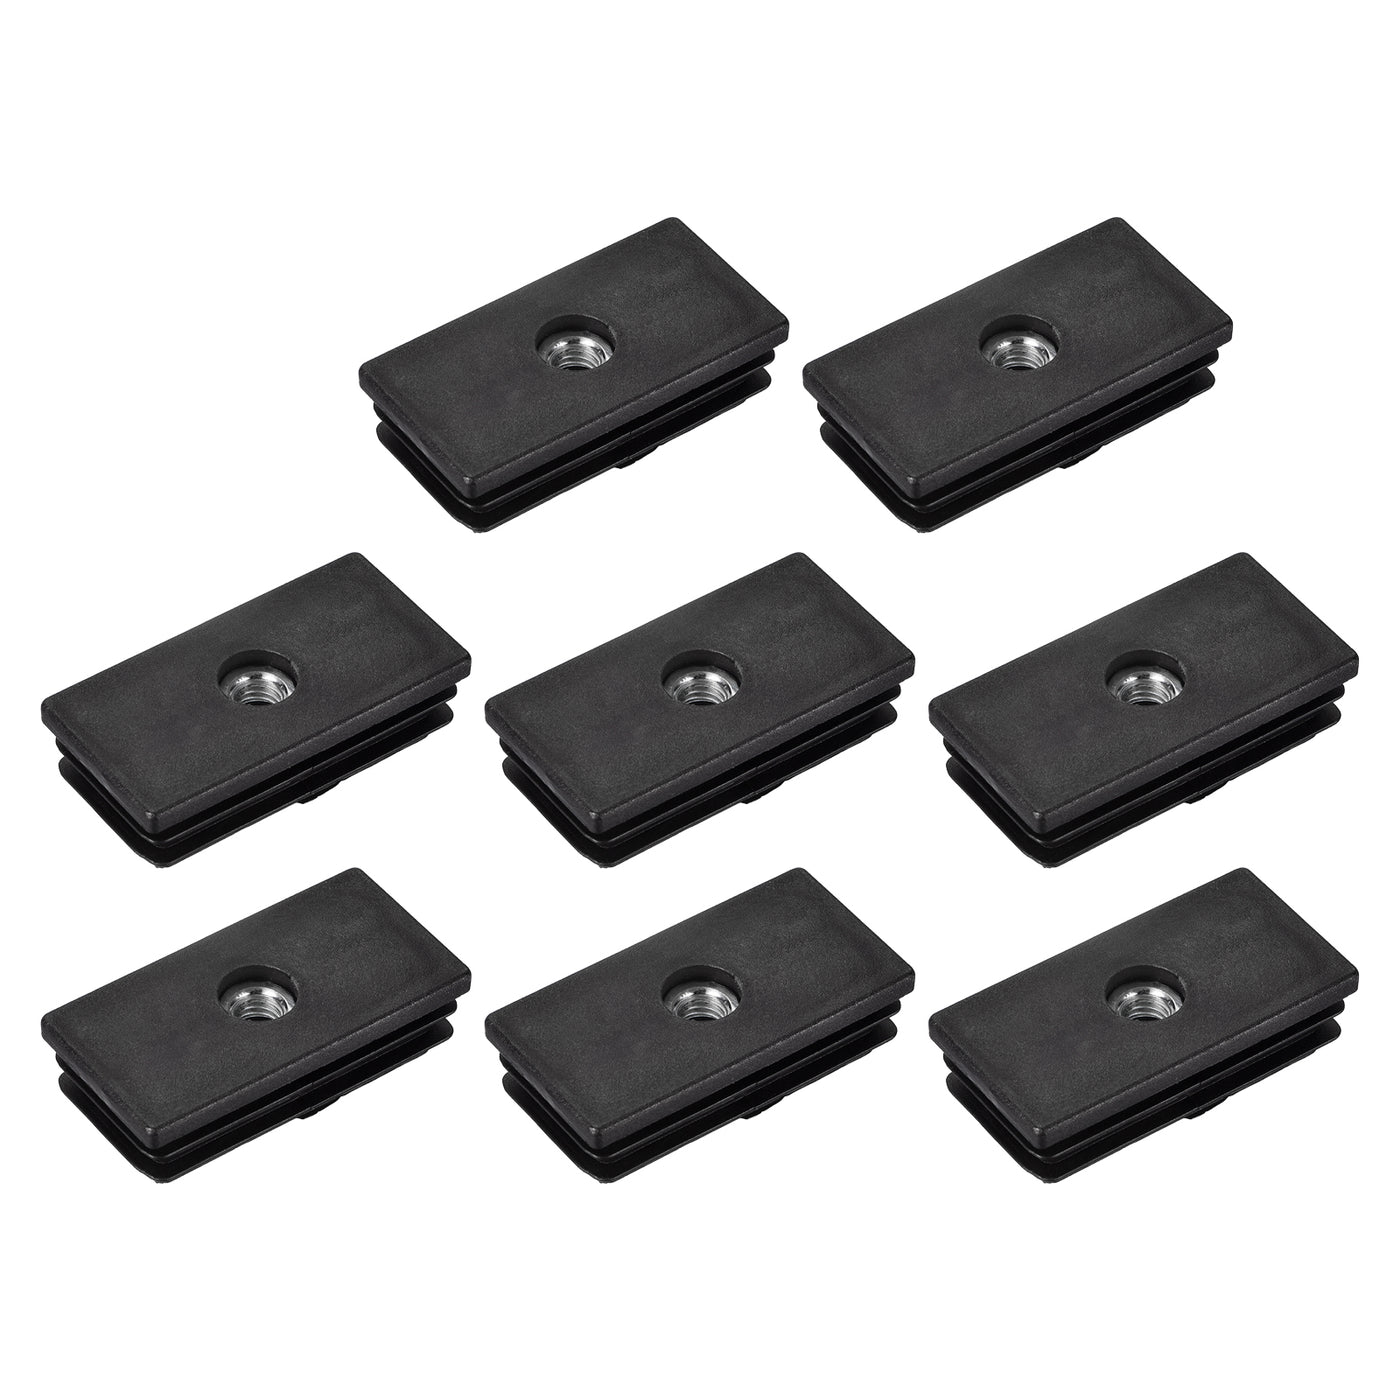 uxcell Uxcell 8Pcs 2.36"x1.18" Caster Insert with Thread, Rectangle M8 Thread for Furniture